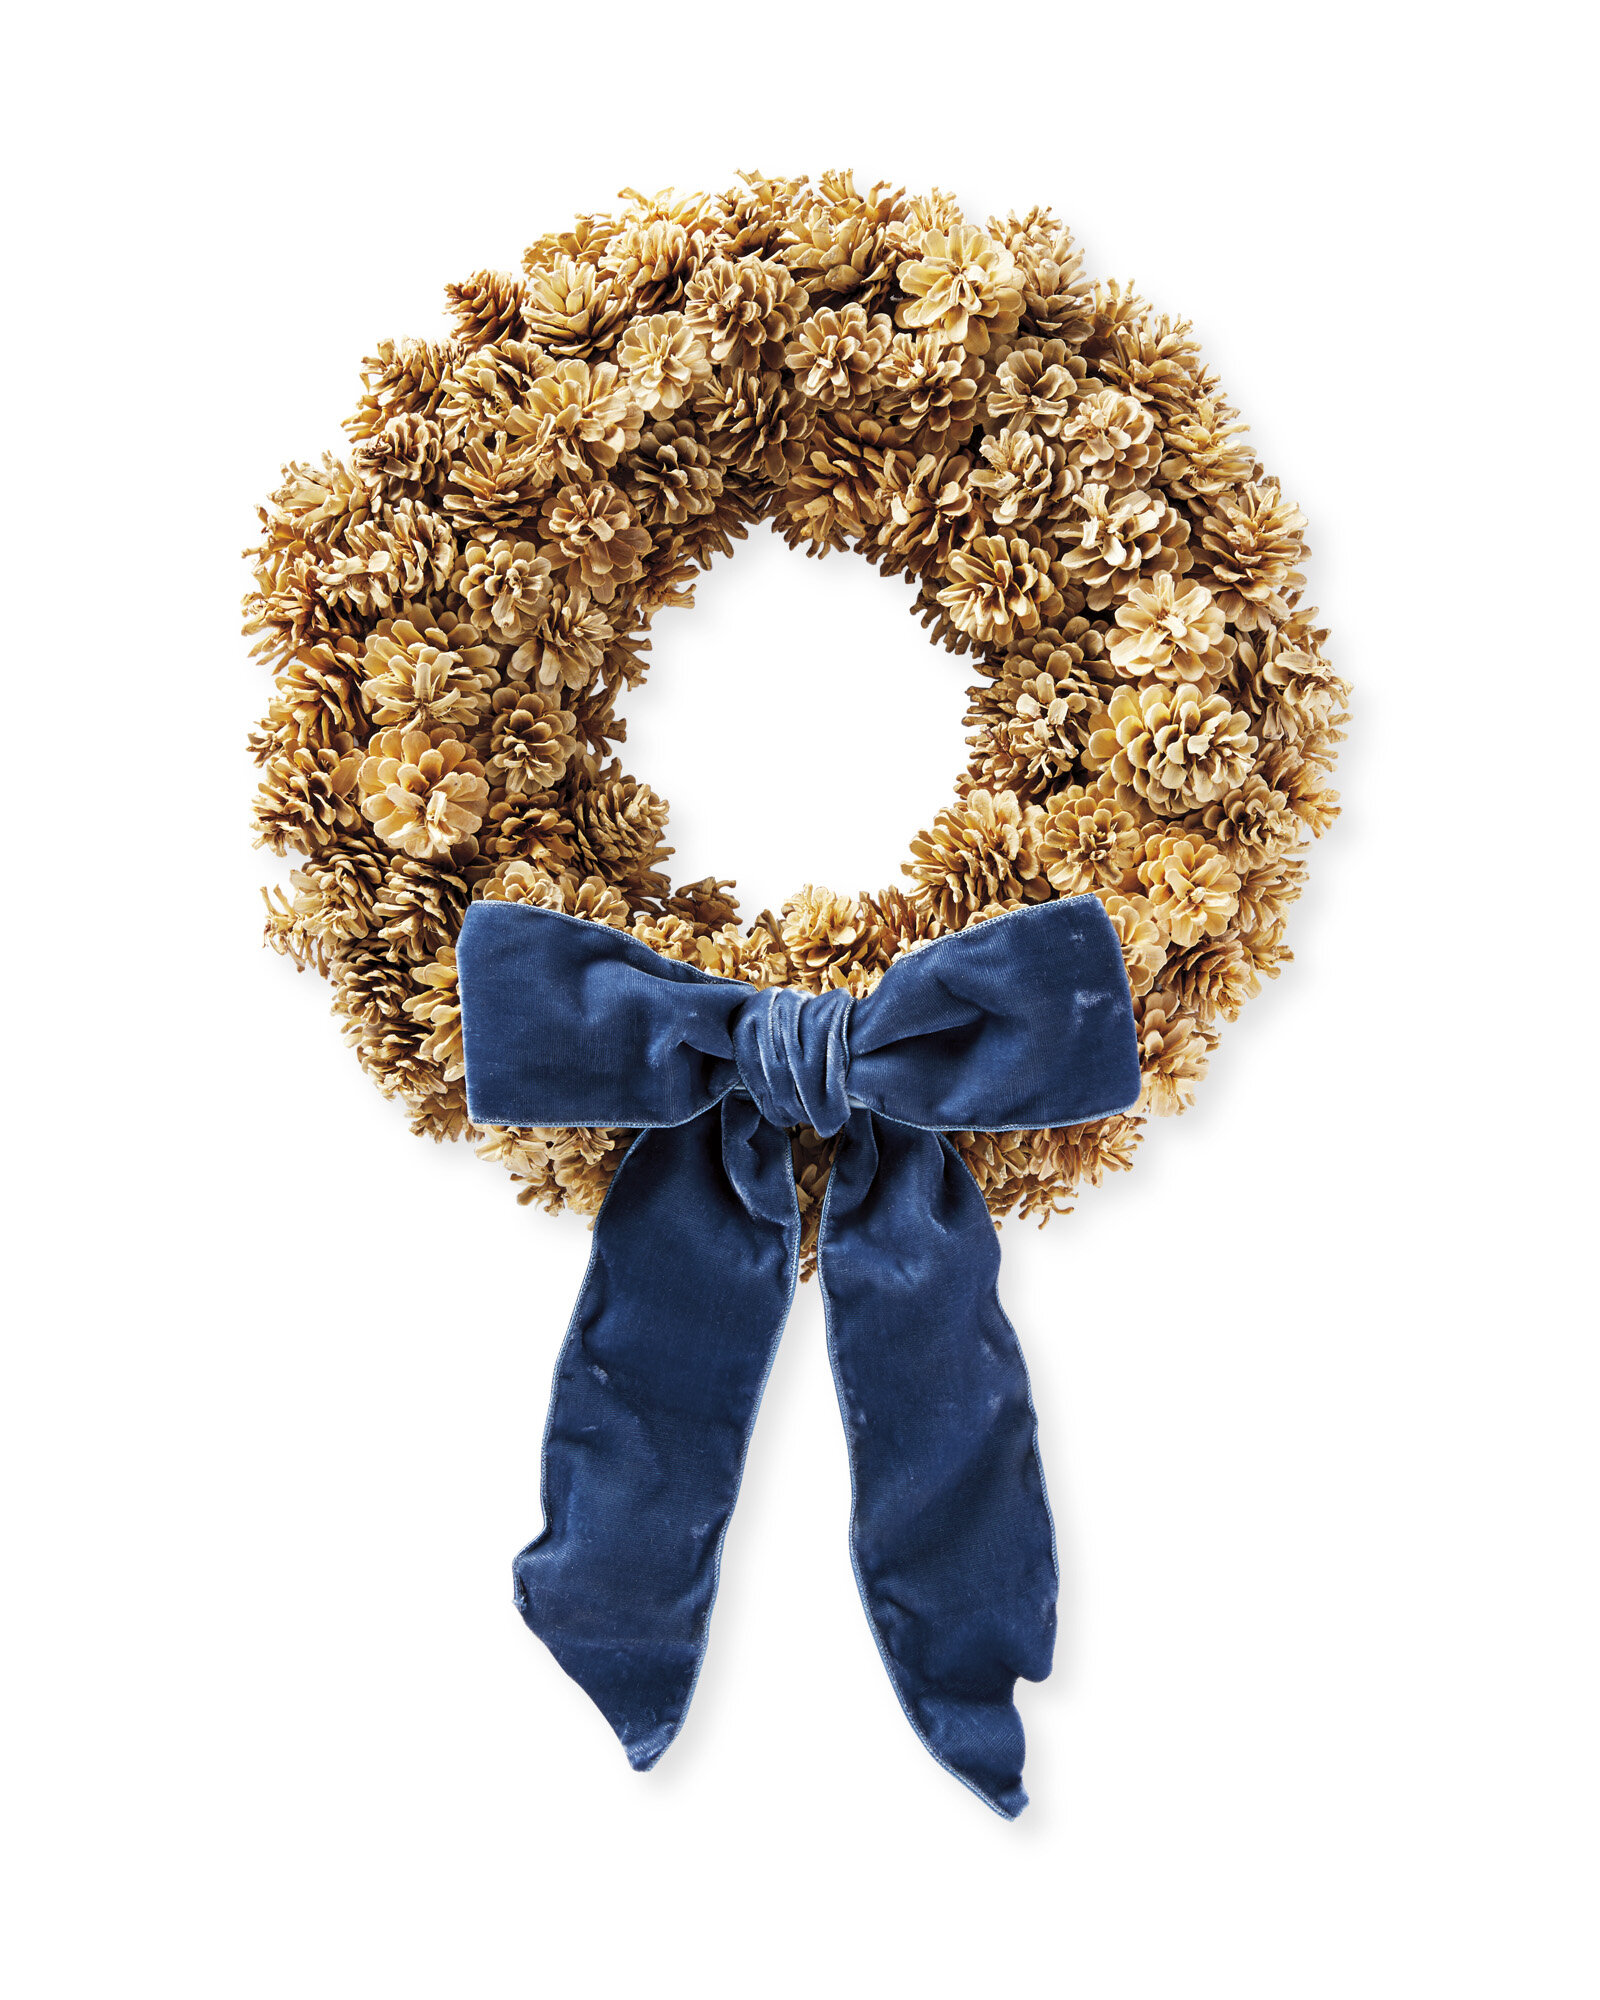 Still heavily eyeing this wreath